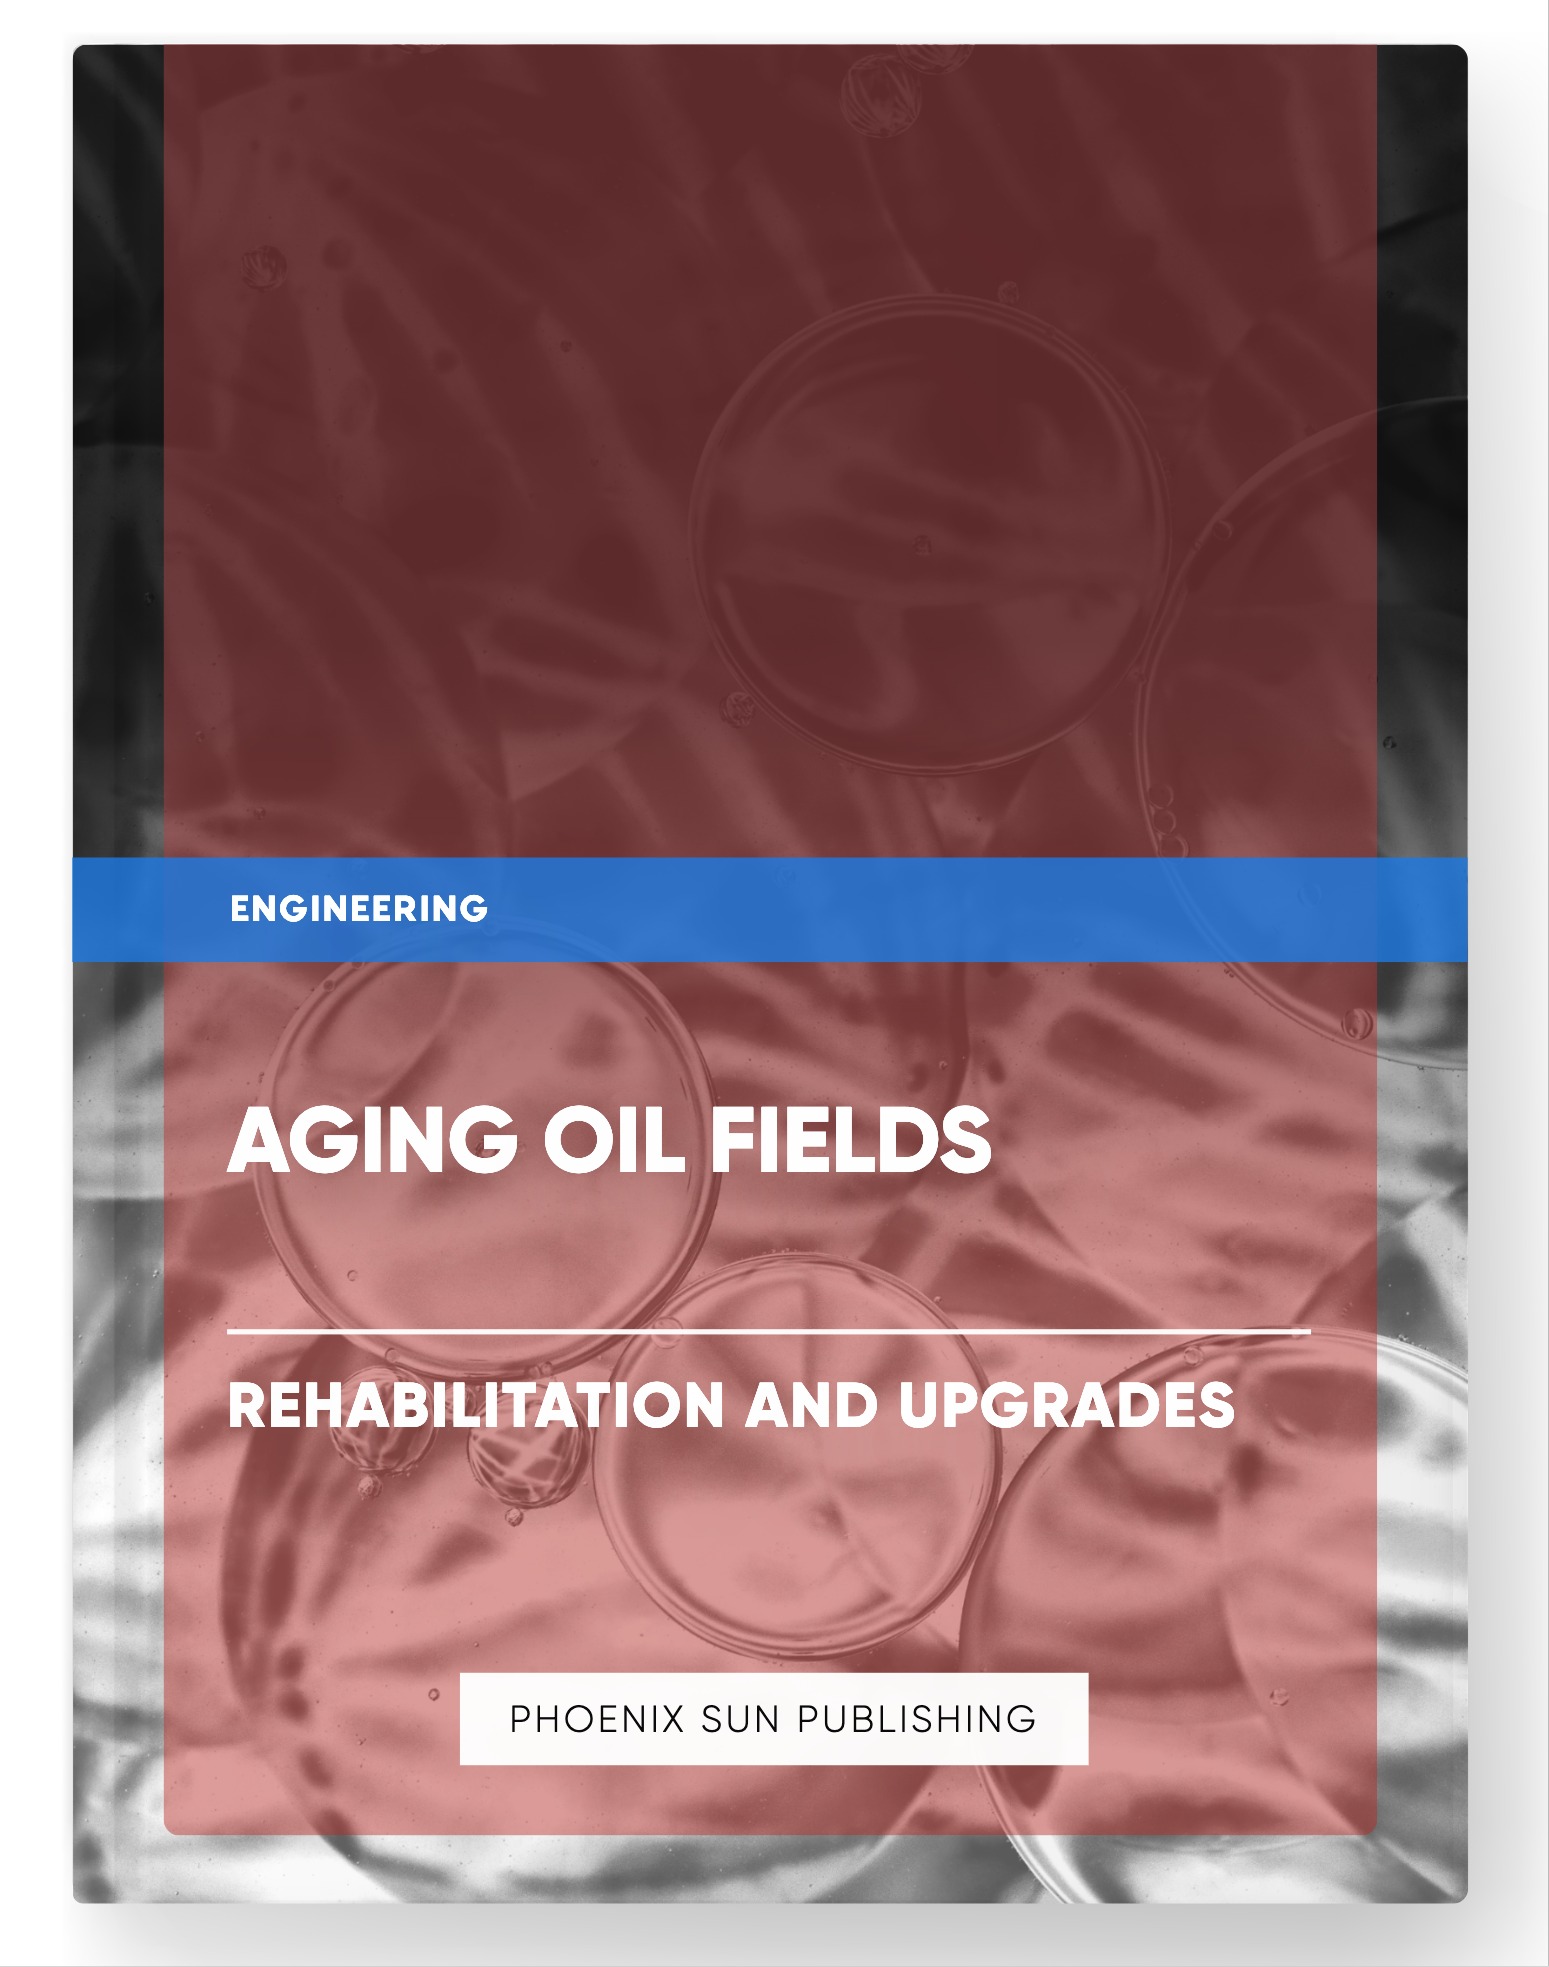 Aging Oil Fields – Rehabilitation and Upgrades